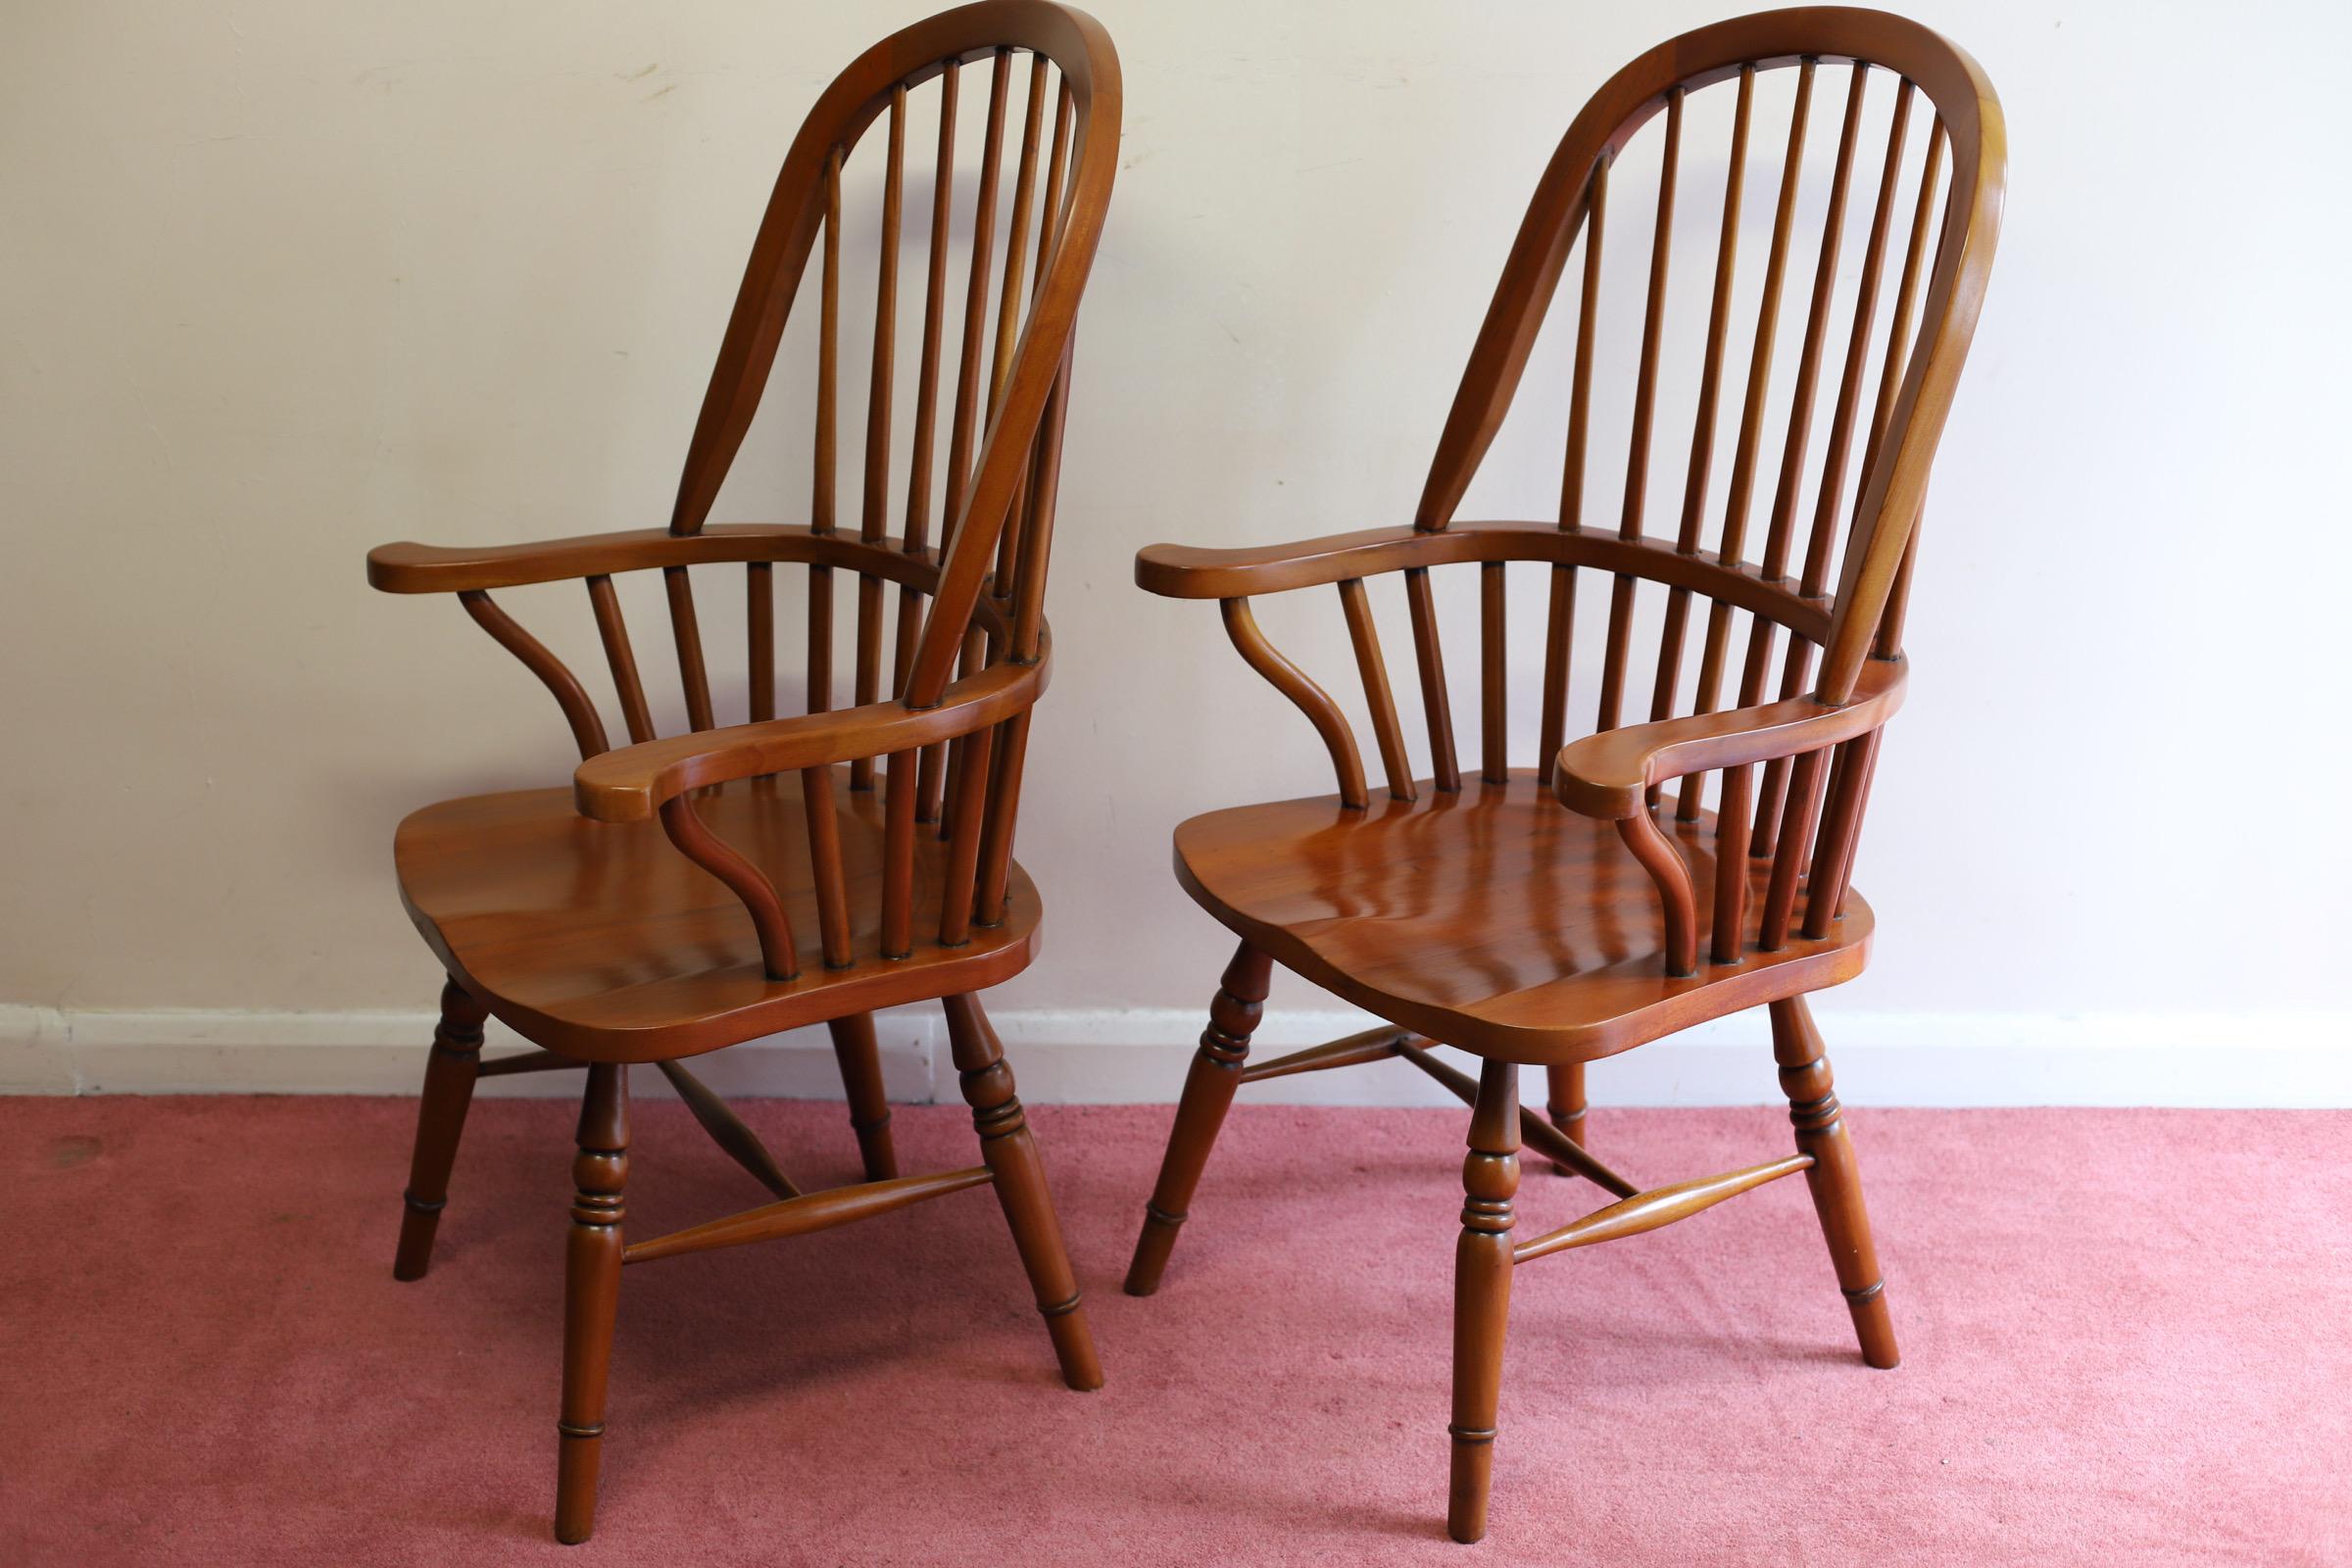 Beautiful antique Windsor armchairs in excellent condition circa 1930
Don't hesitate to contact me if you have any questions.
Please have a closer look at the pictures because they form part of the description.
Dimensions
Height - 116 cm
Width - 65